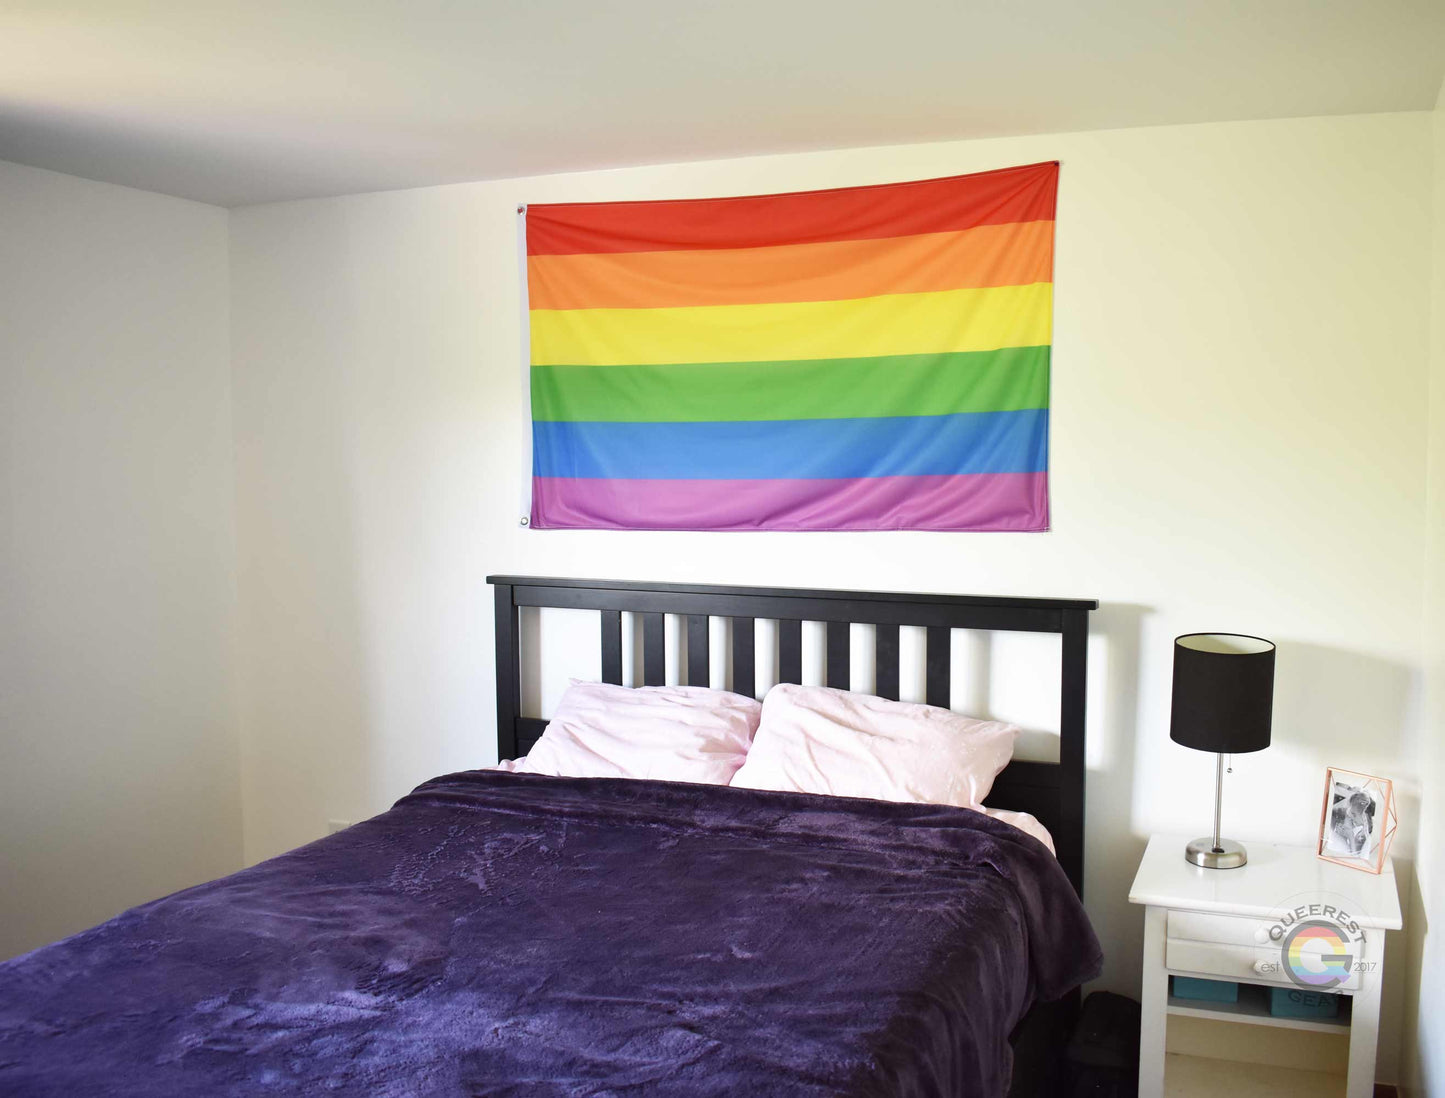 3’x5’ rainbow pride flag hanging horizontally on the wall of a bedroom centered above a bed with a purple blanket